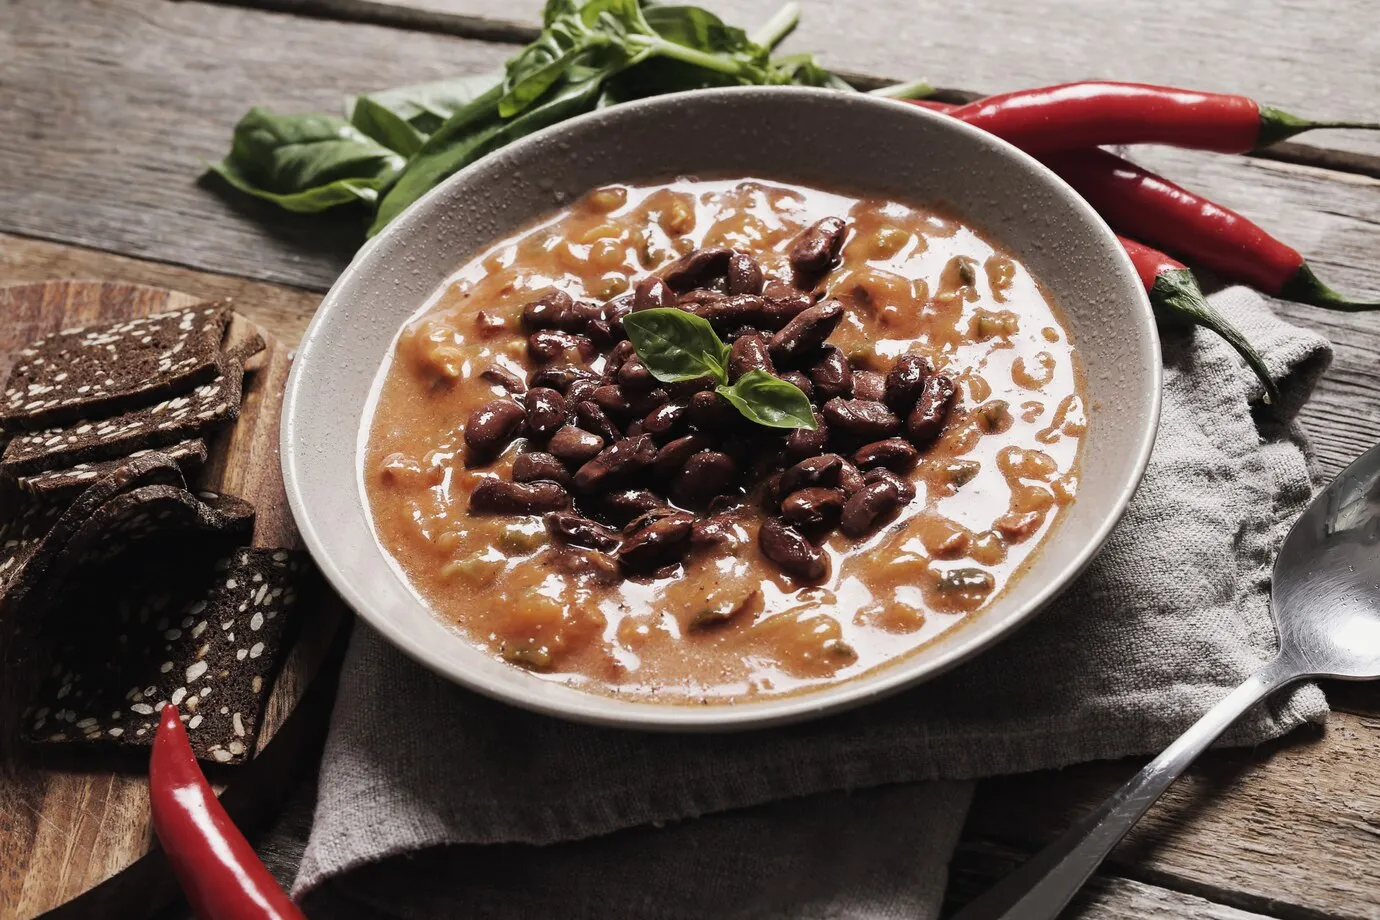 Enjoy the health benefits of eating a warm bowl of bean soup at night.